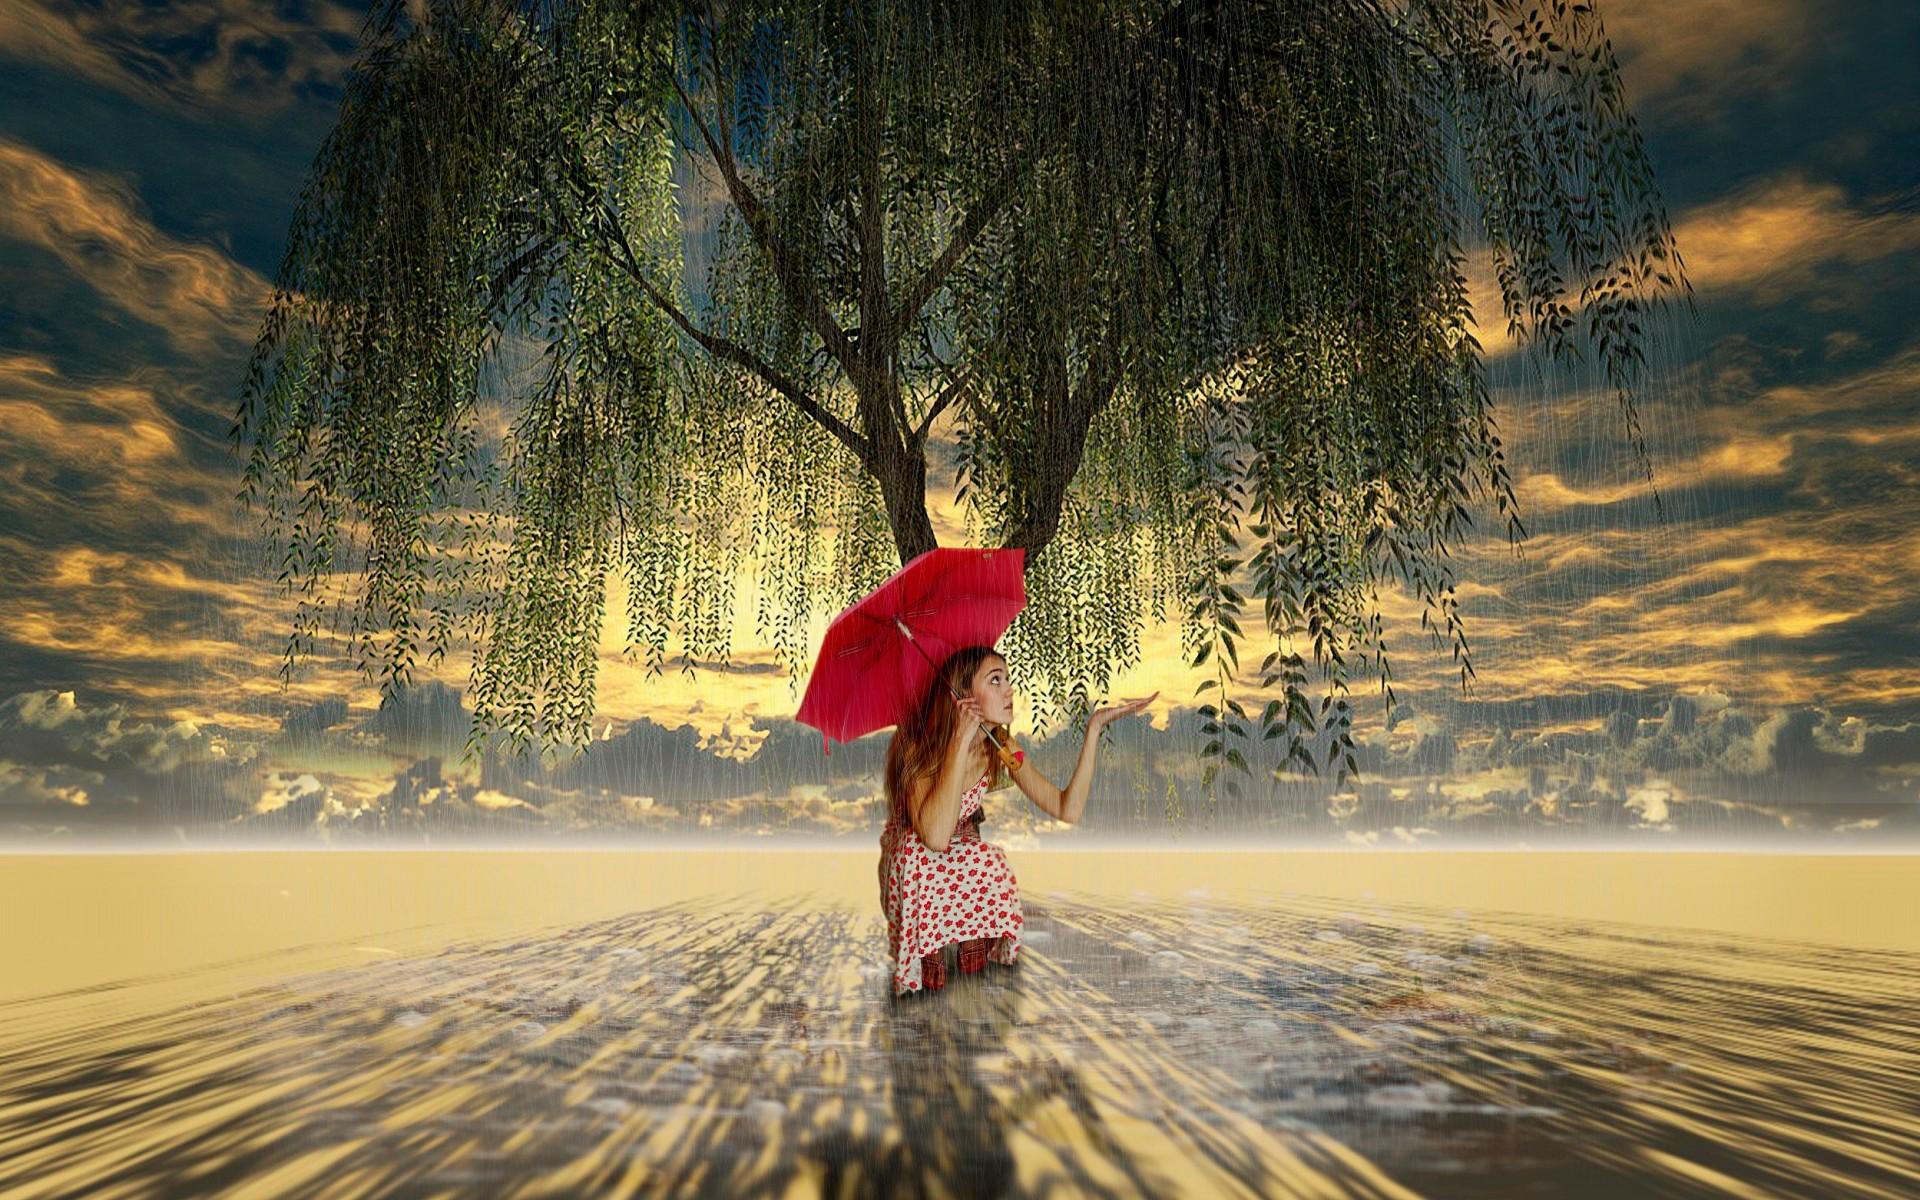 Girl with Red Umbrella under Willow Tree on a Rainy Day widescreen